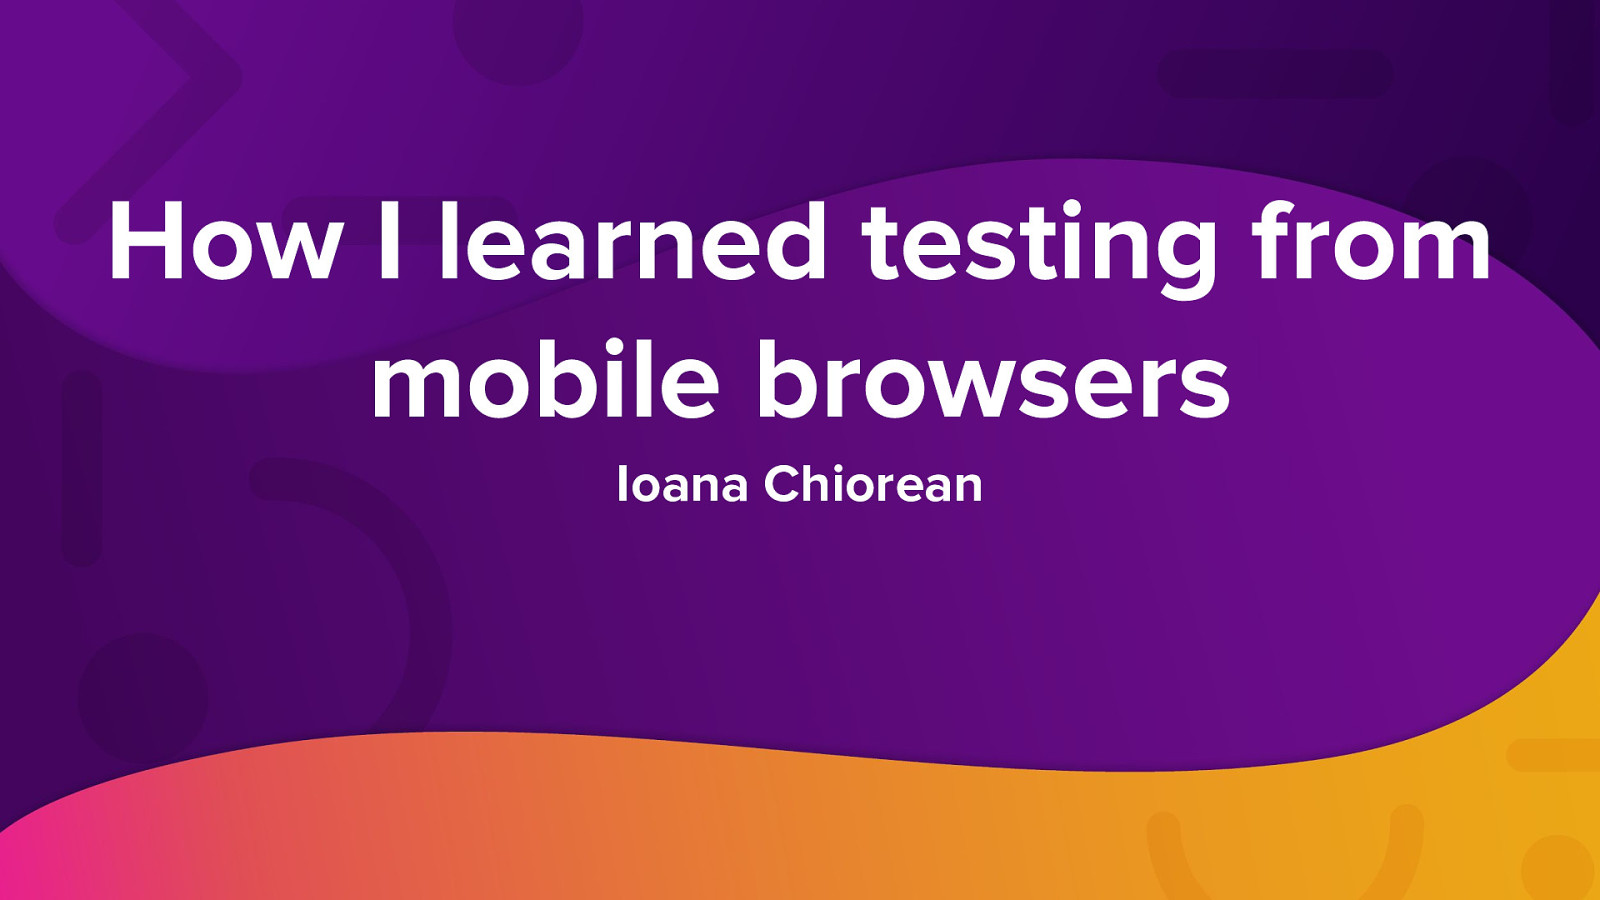 How I learned testing from mobile browsers